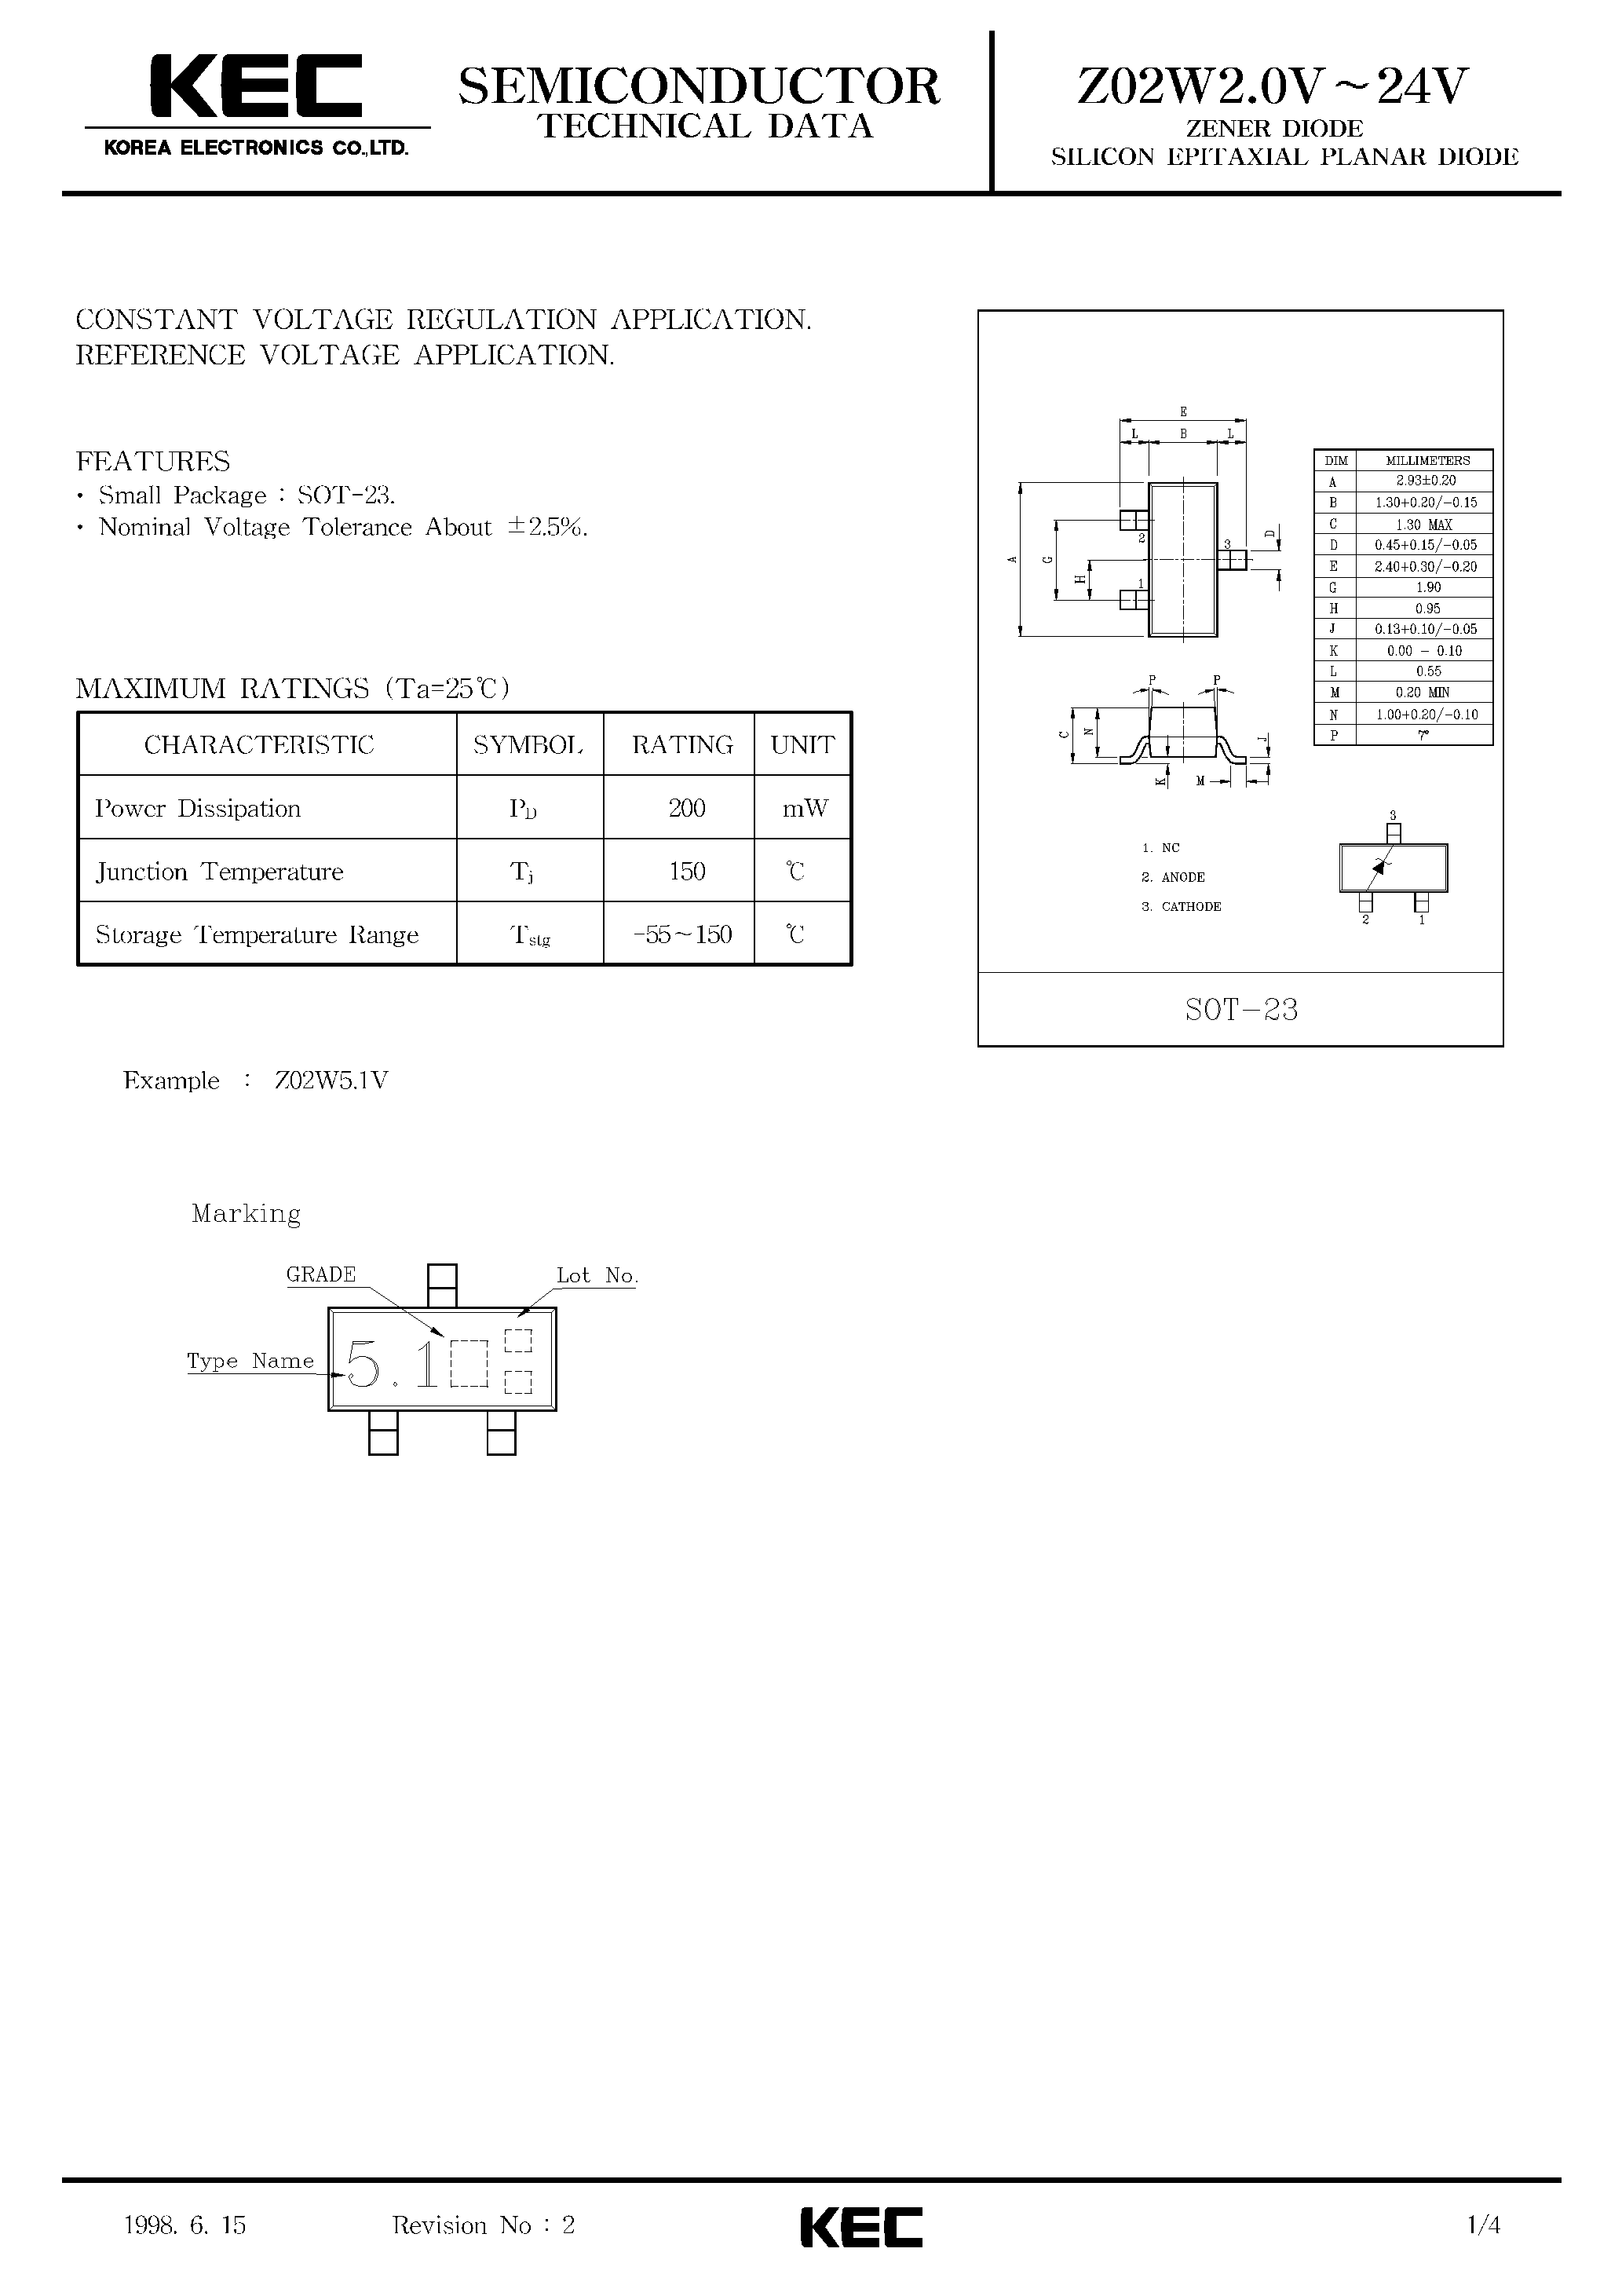 Datasheet Z02W7.5V - ZENER DIODE SILICON EPITAXIAL PLANAR DIODE page 1